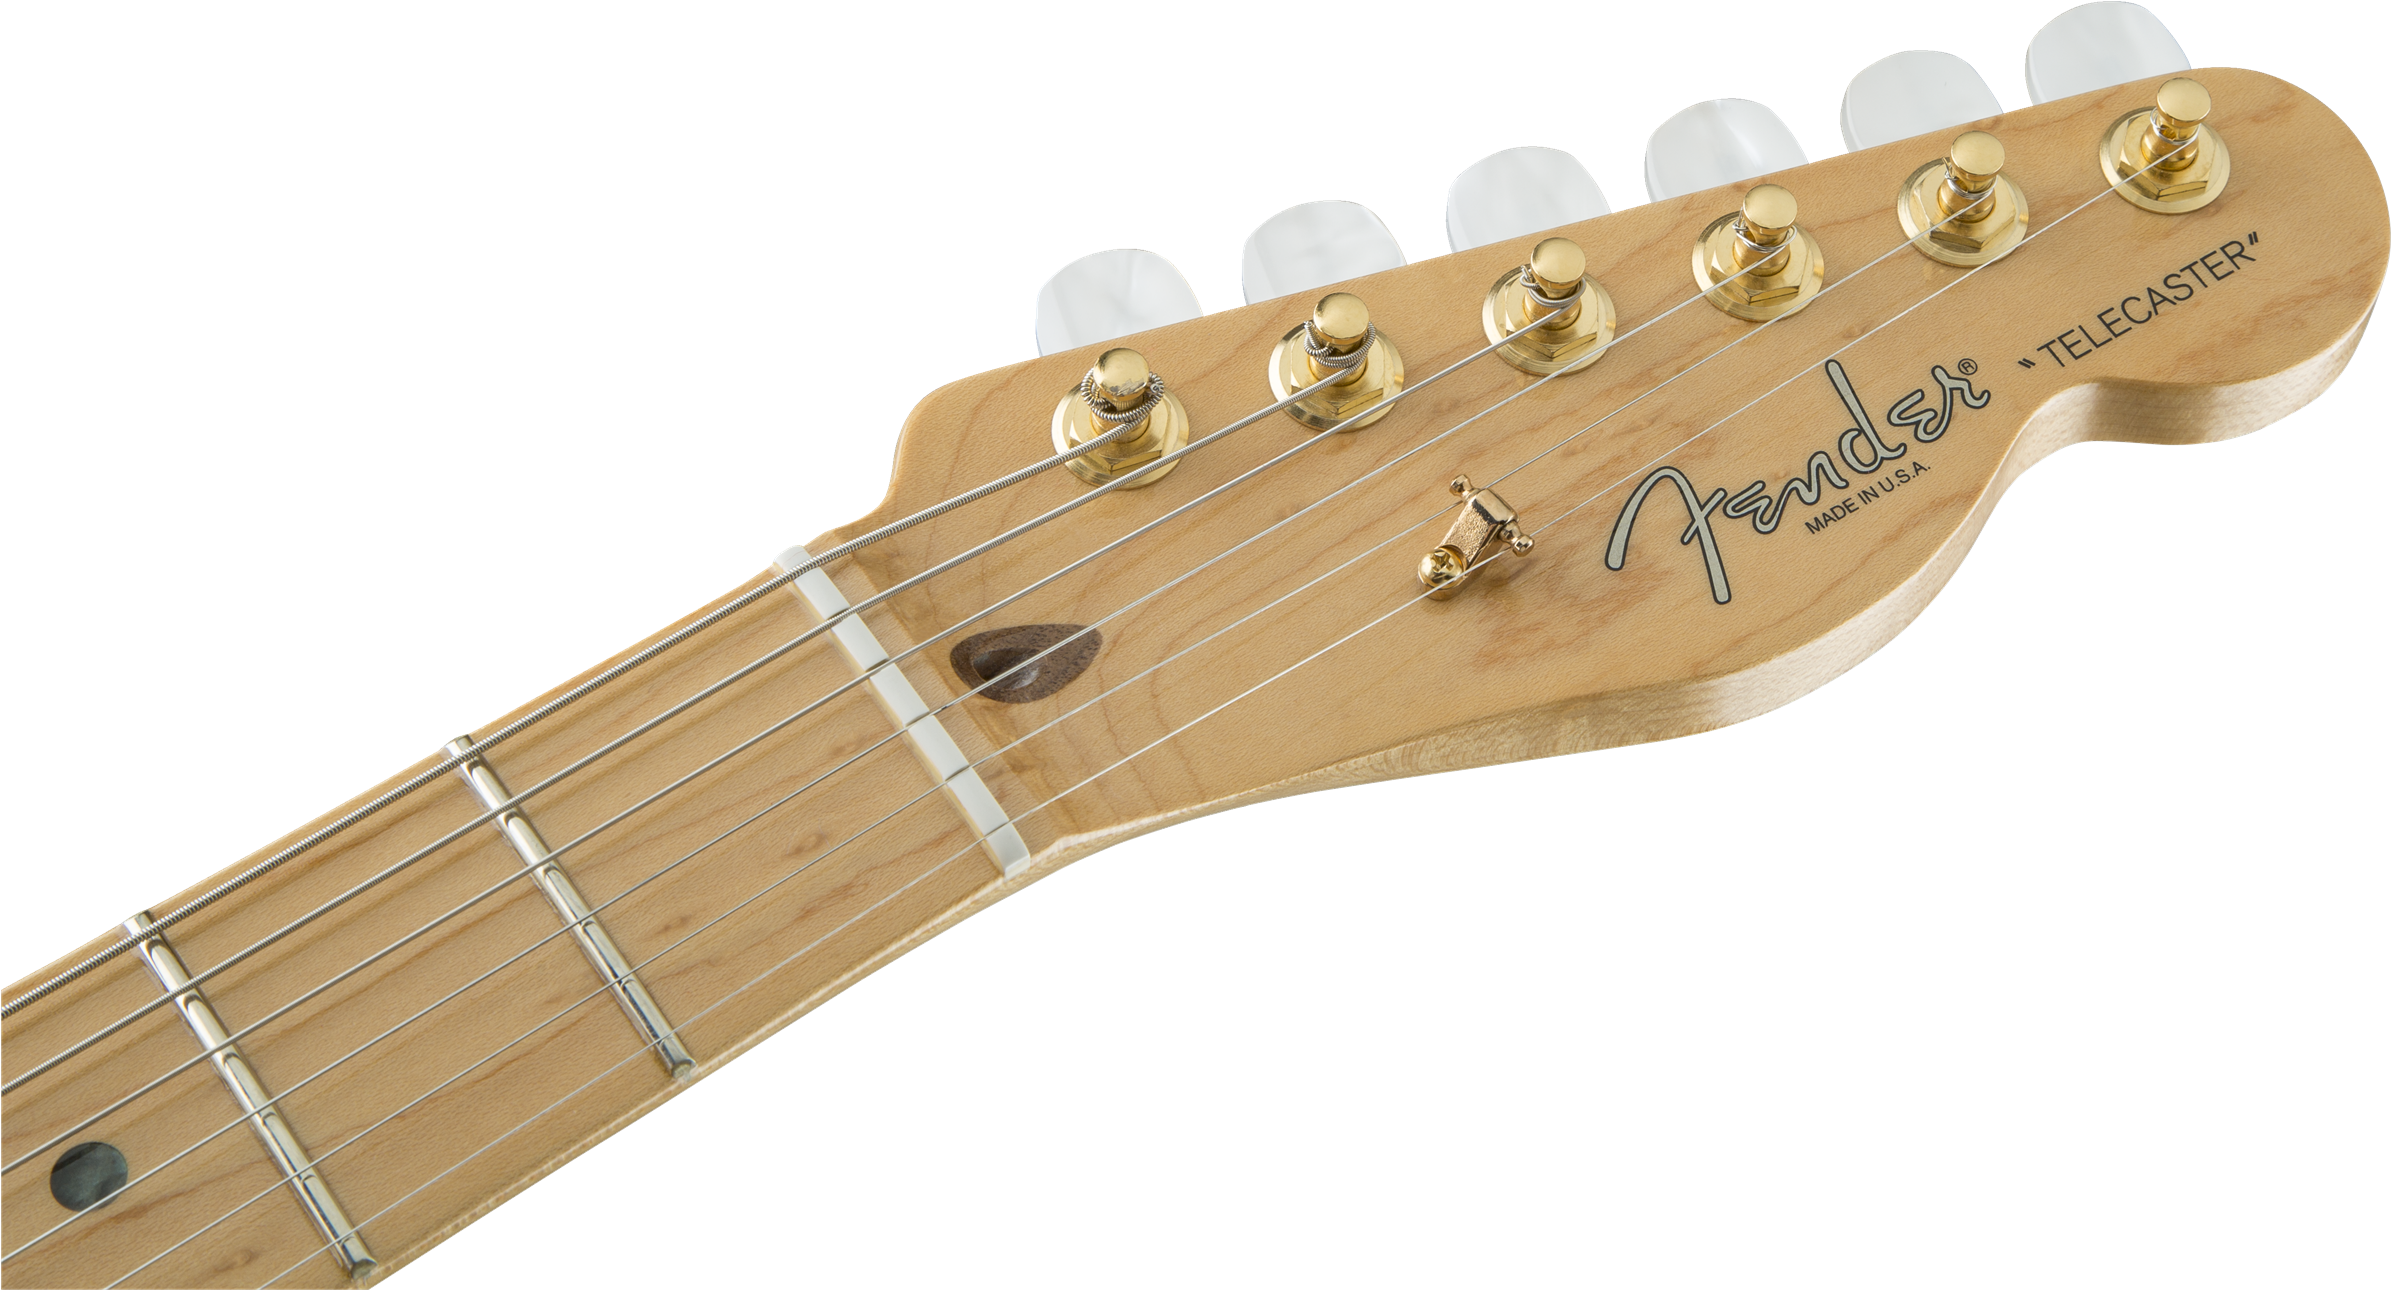 Fender Limited Edition Select Light Ash Telecaster, White Blonde 0170803701 Discontinued Last One